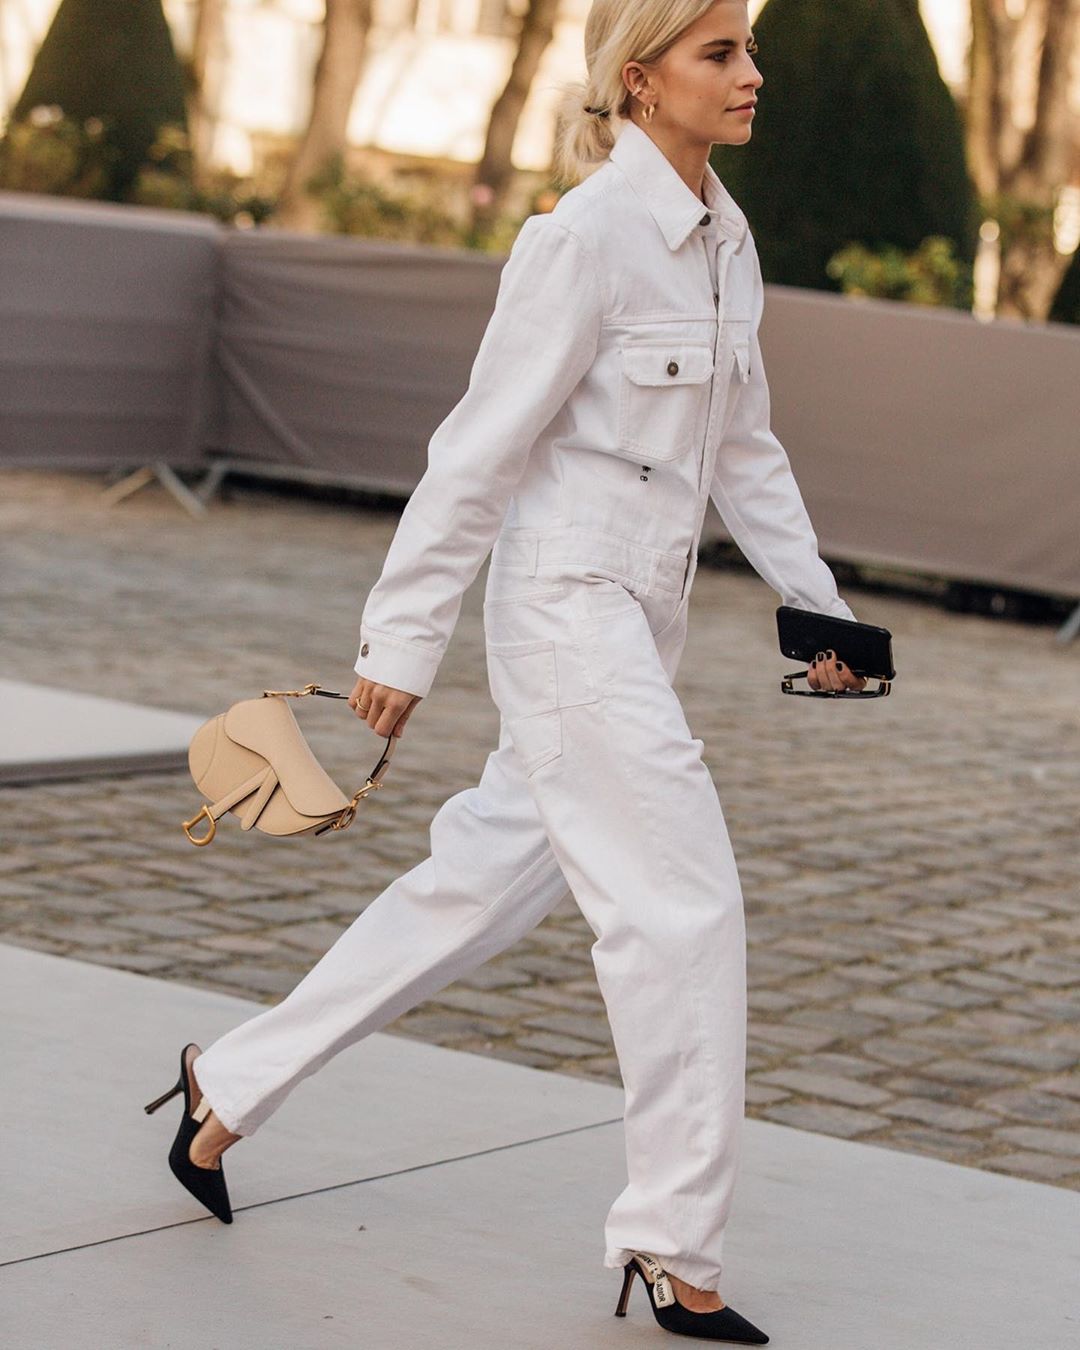 Update Your Winter Wardrobe With a Must-Have Jumpsuit